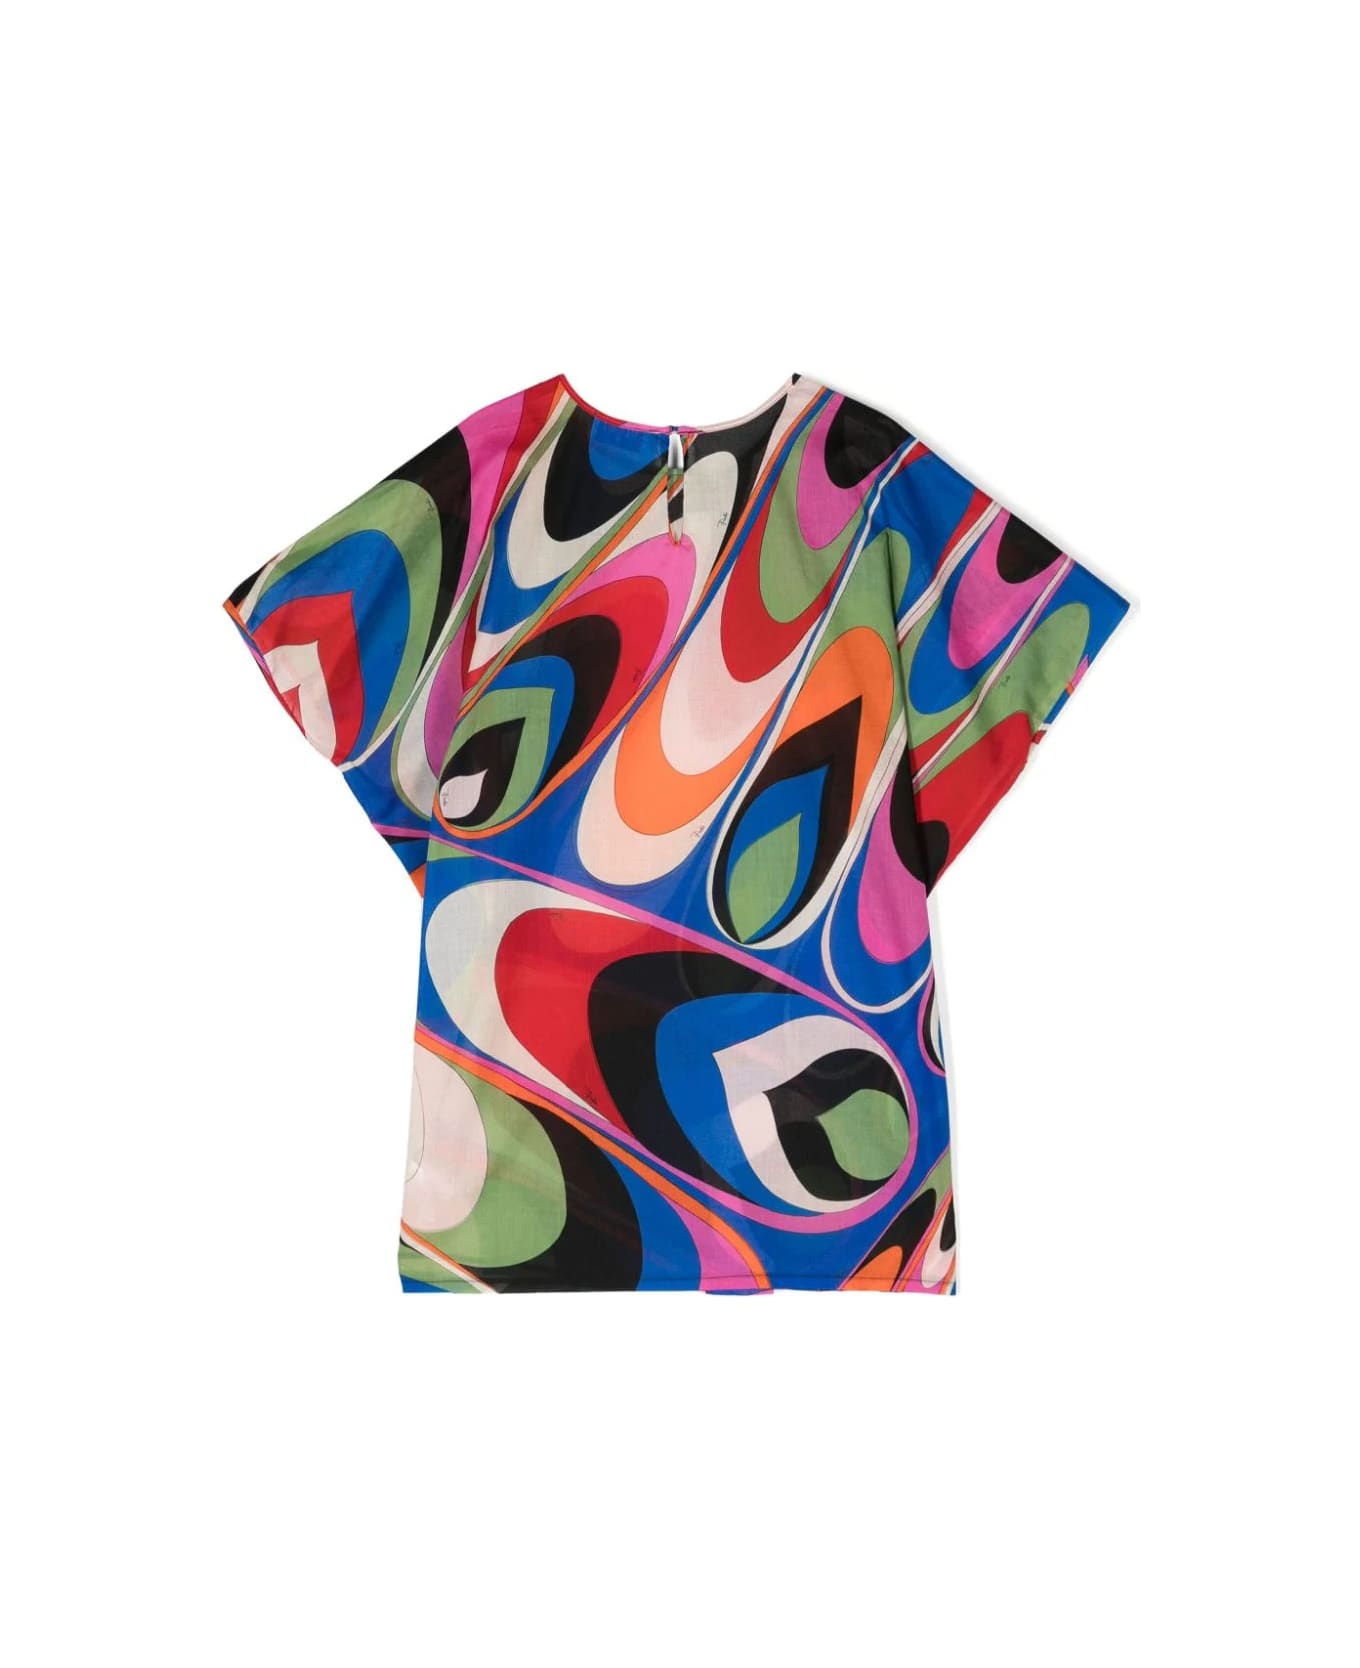 Pucci Multicoloured Waves Print Short Sleeved Dress - Multicolour